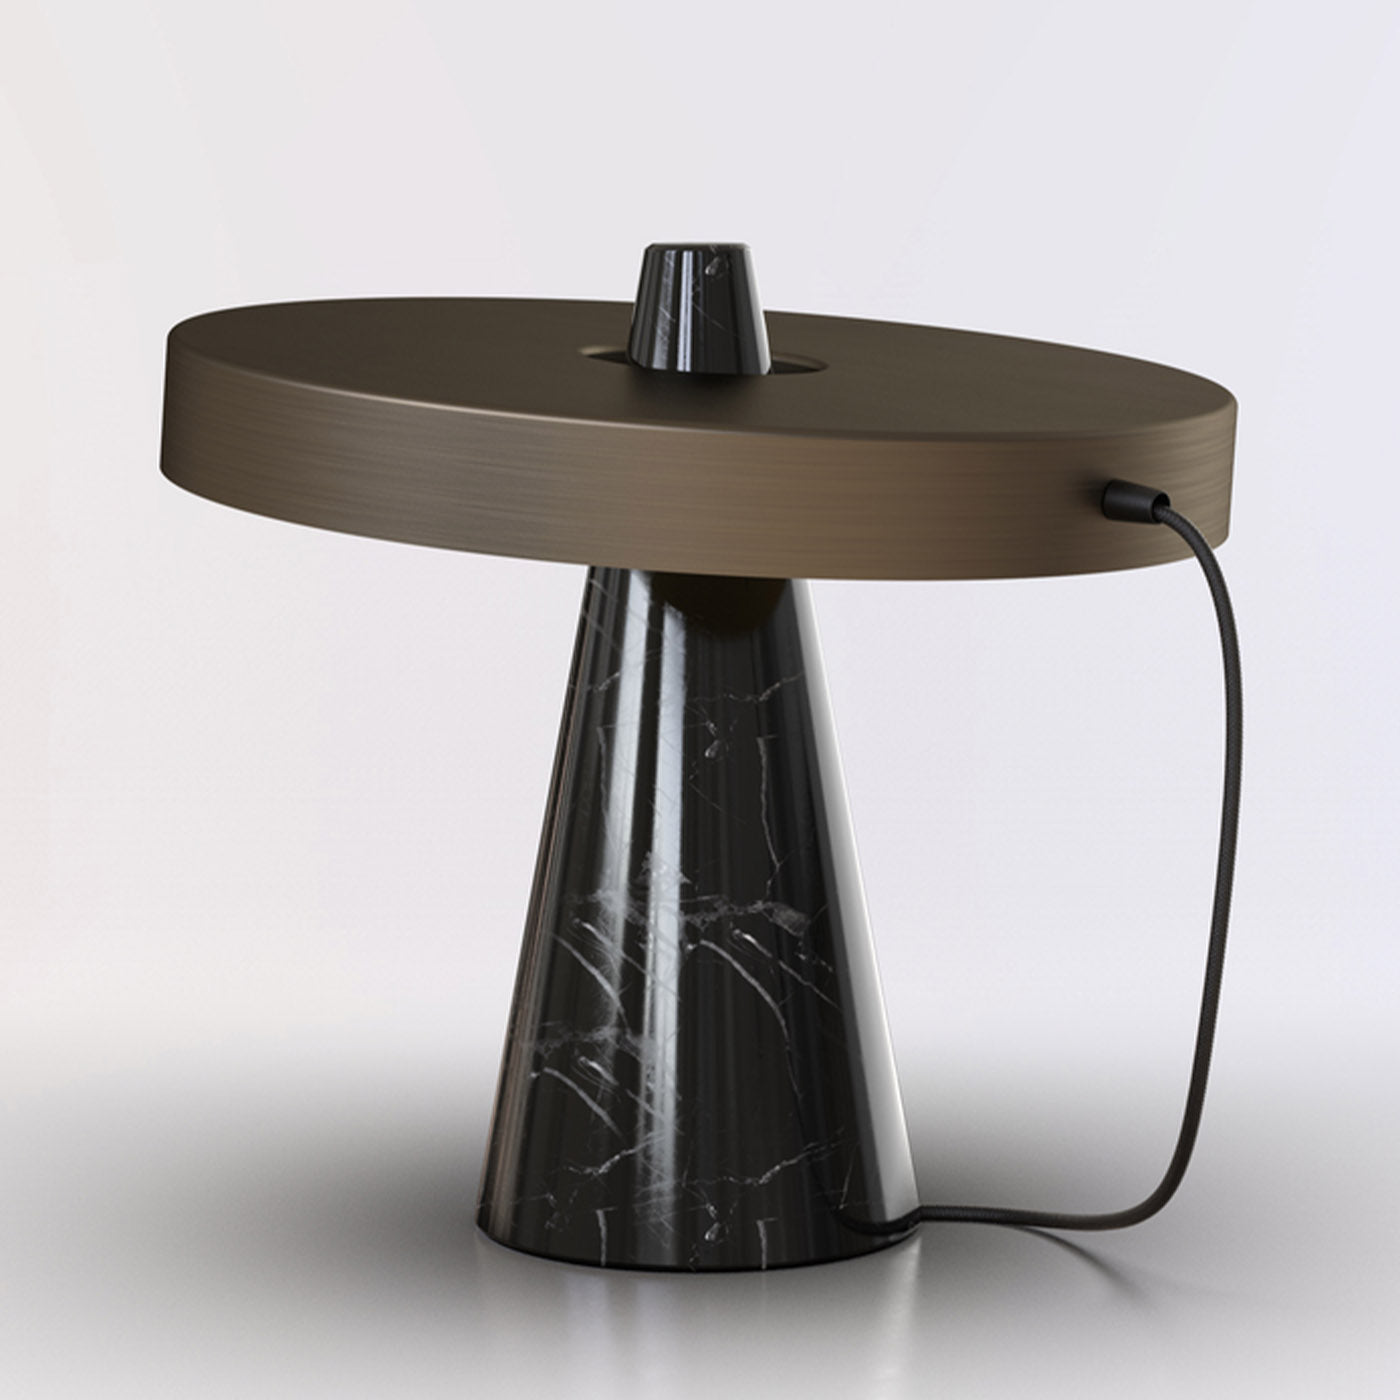 ED039 Black Stone and Bronze Table Lamp - Alternative view 1